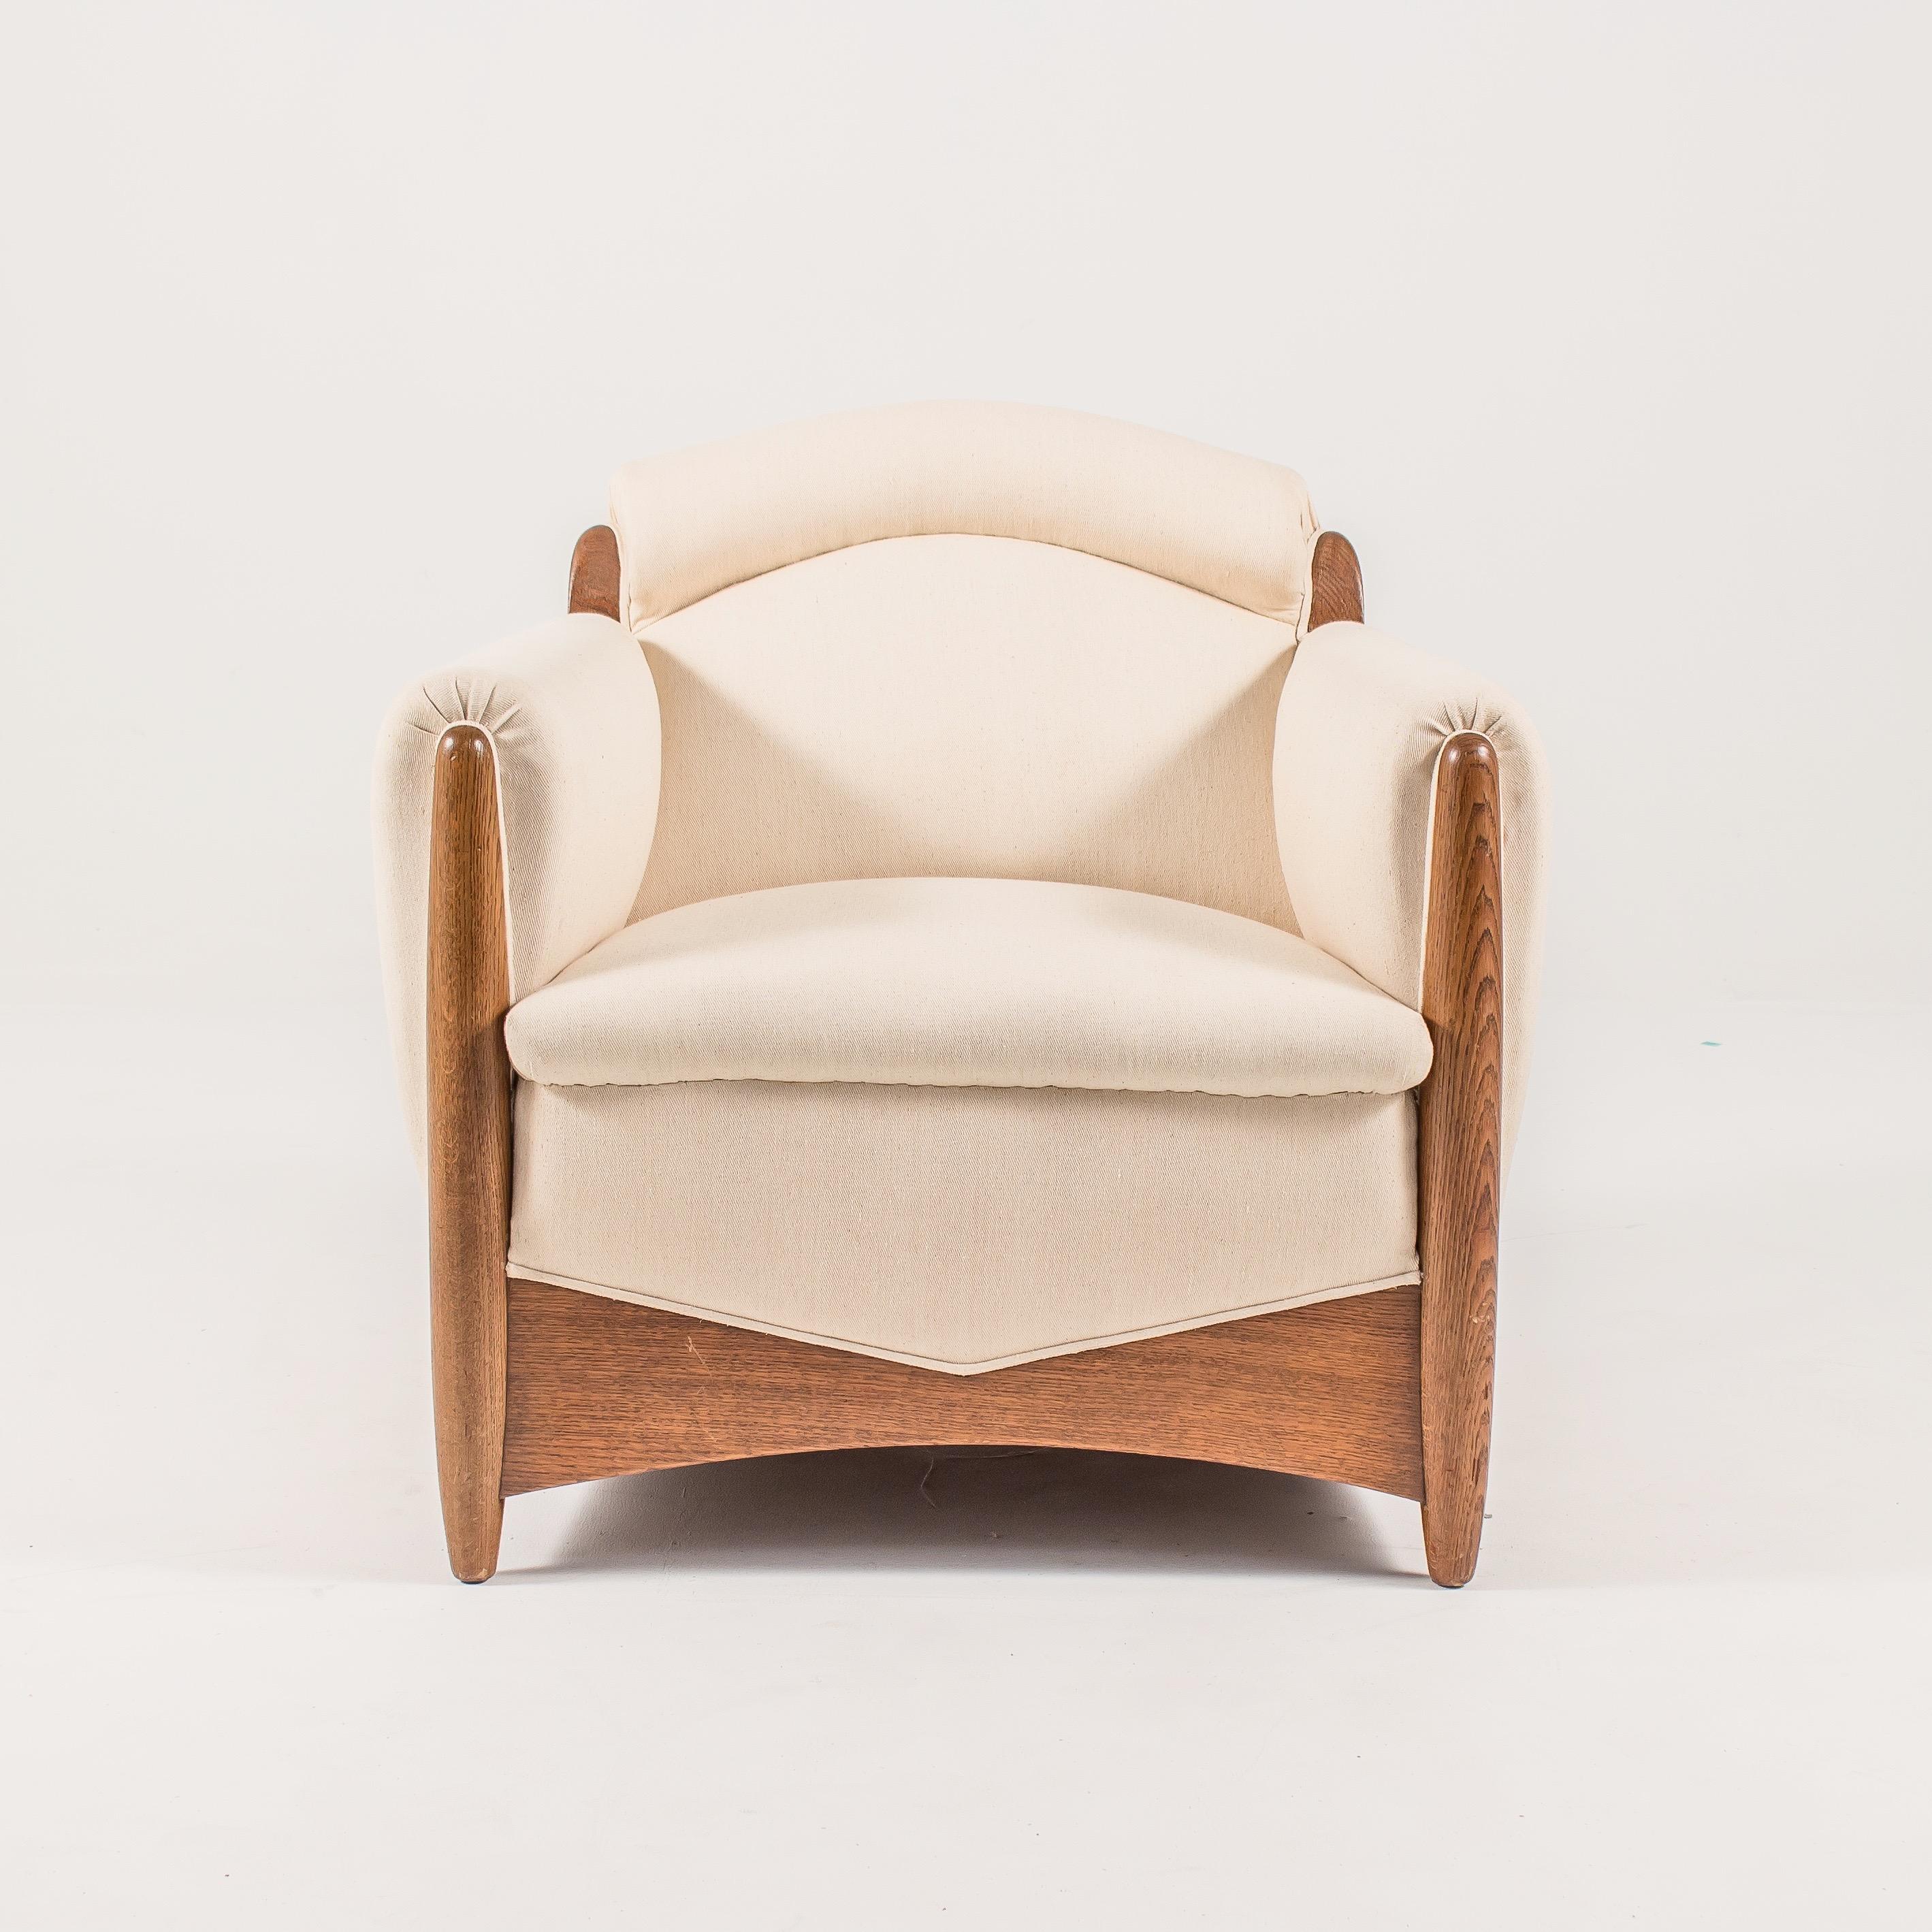 The upholstered seat and back set within an oak frame with sweeping sides and turned uprights with bun feet to the back.

Netherlands, circa 1920s.